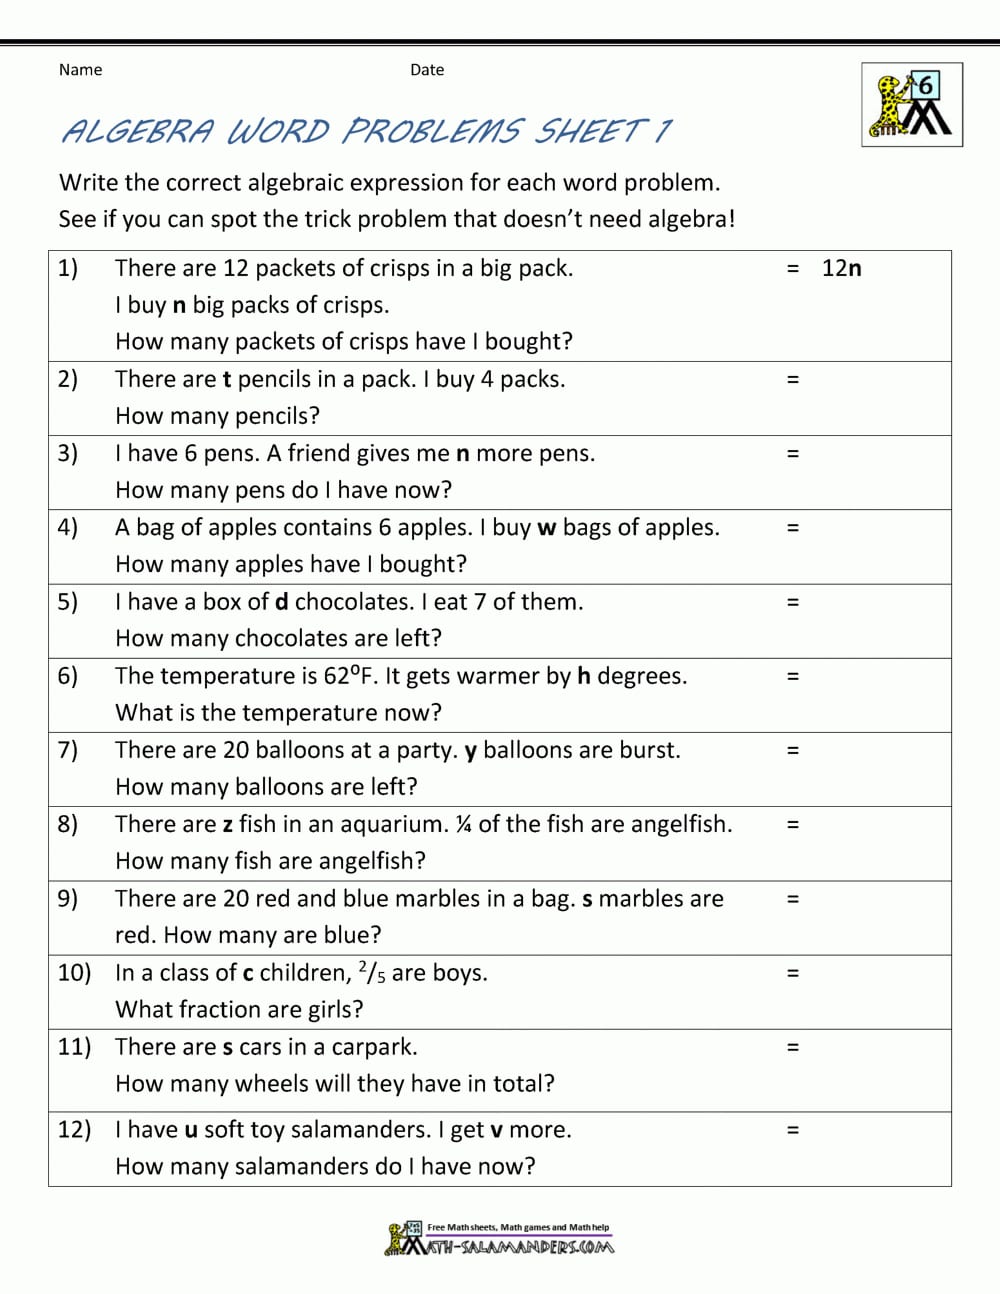 For Ukg Math Worksheet - Midpoint formula / Some of the worksheets for this concept are chelsea international academy, donna burk, pre primary stage lkg ukg, maths work third term measurement, addition equations, stage 4, ksat, sample work from.